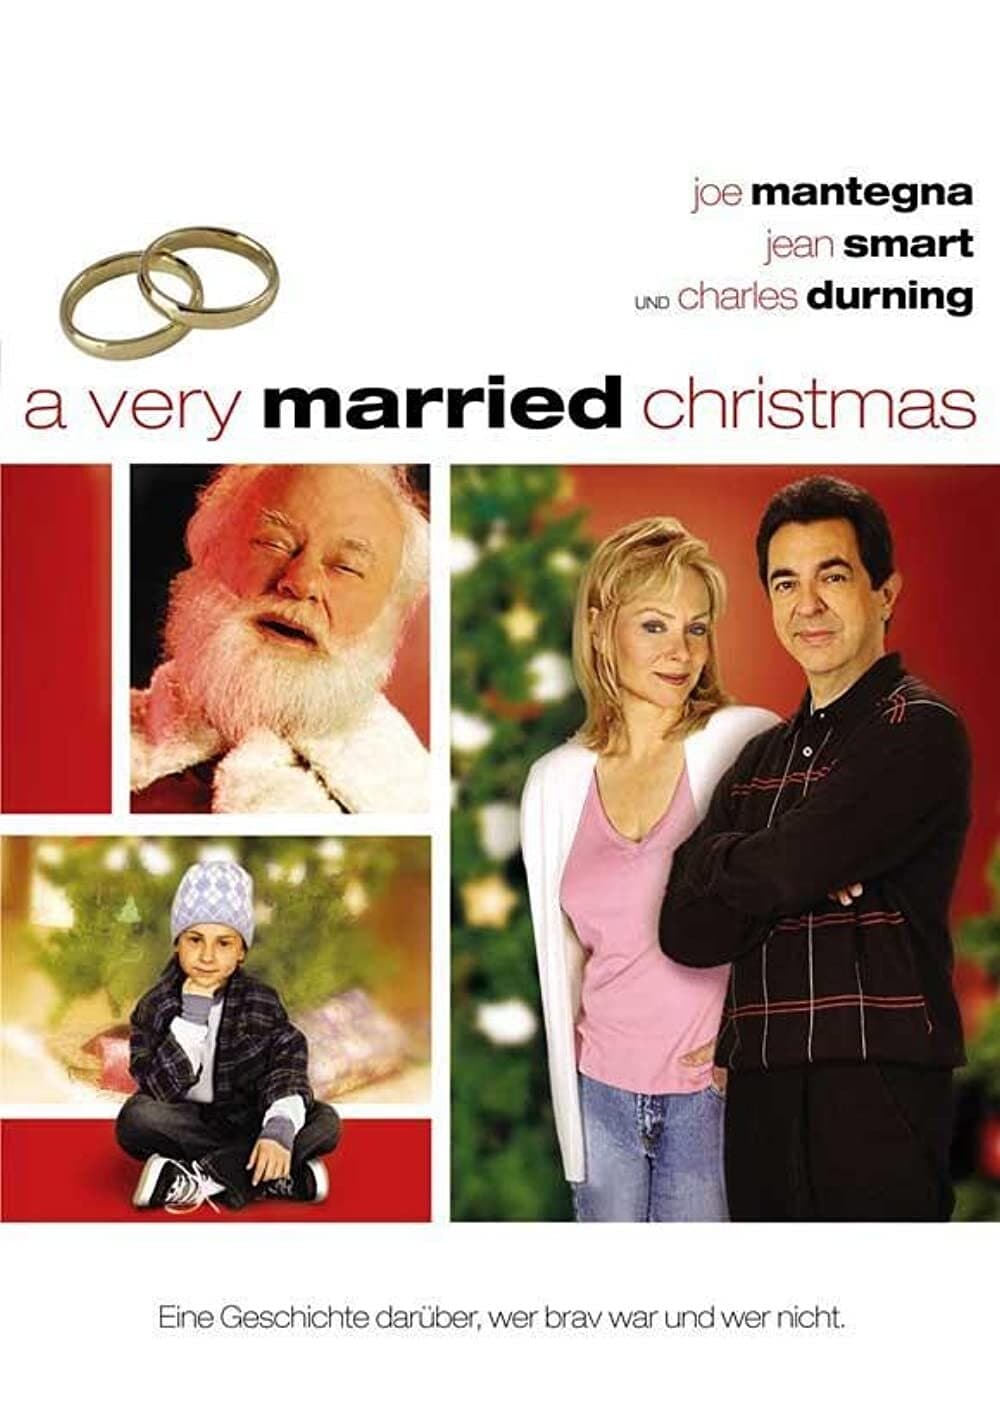 A Very Married Christmas (2004)